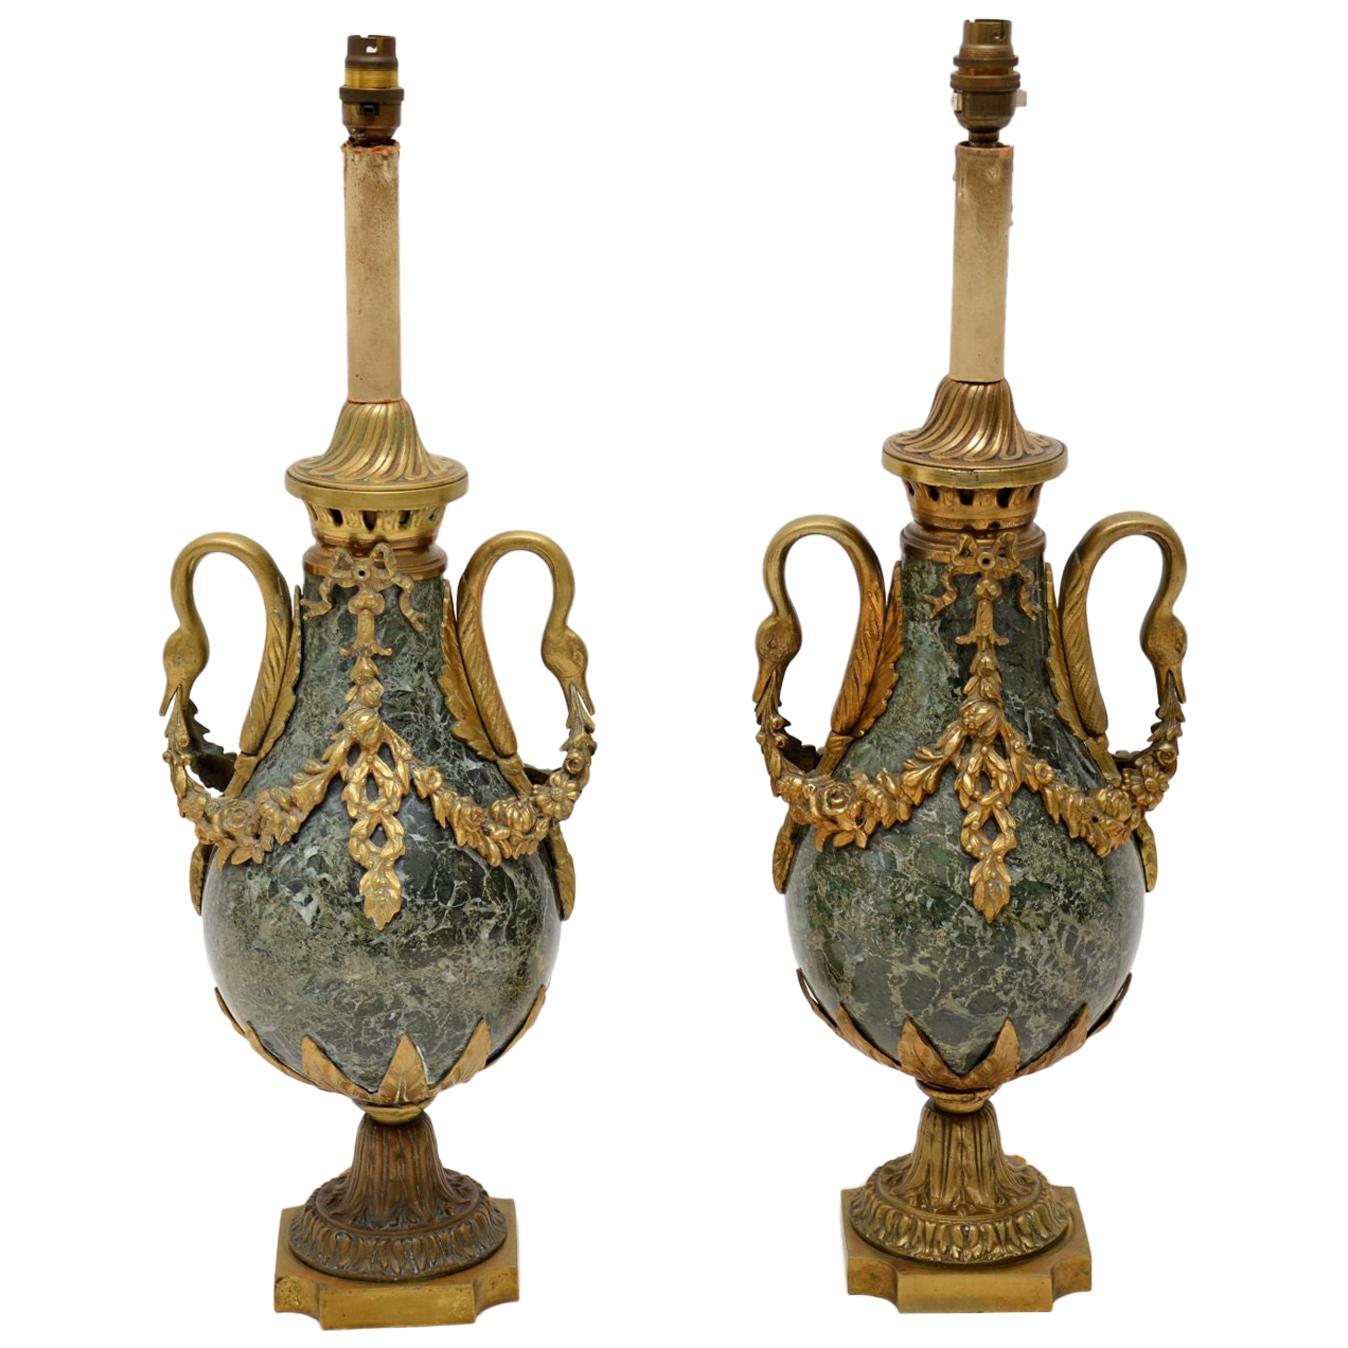 Pair of Antique French Marble and Gilt Metal Table Lamps